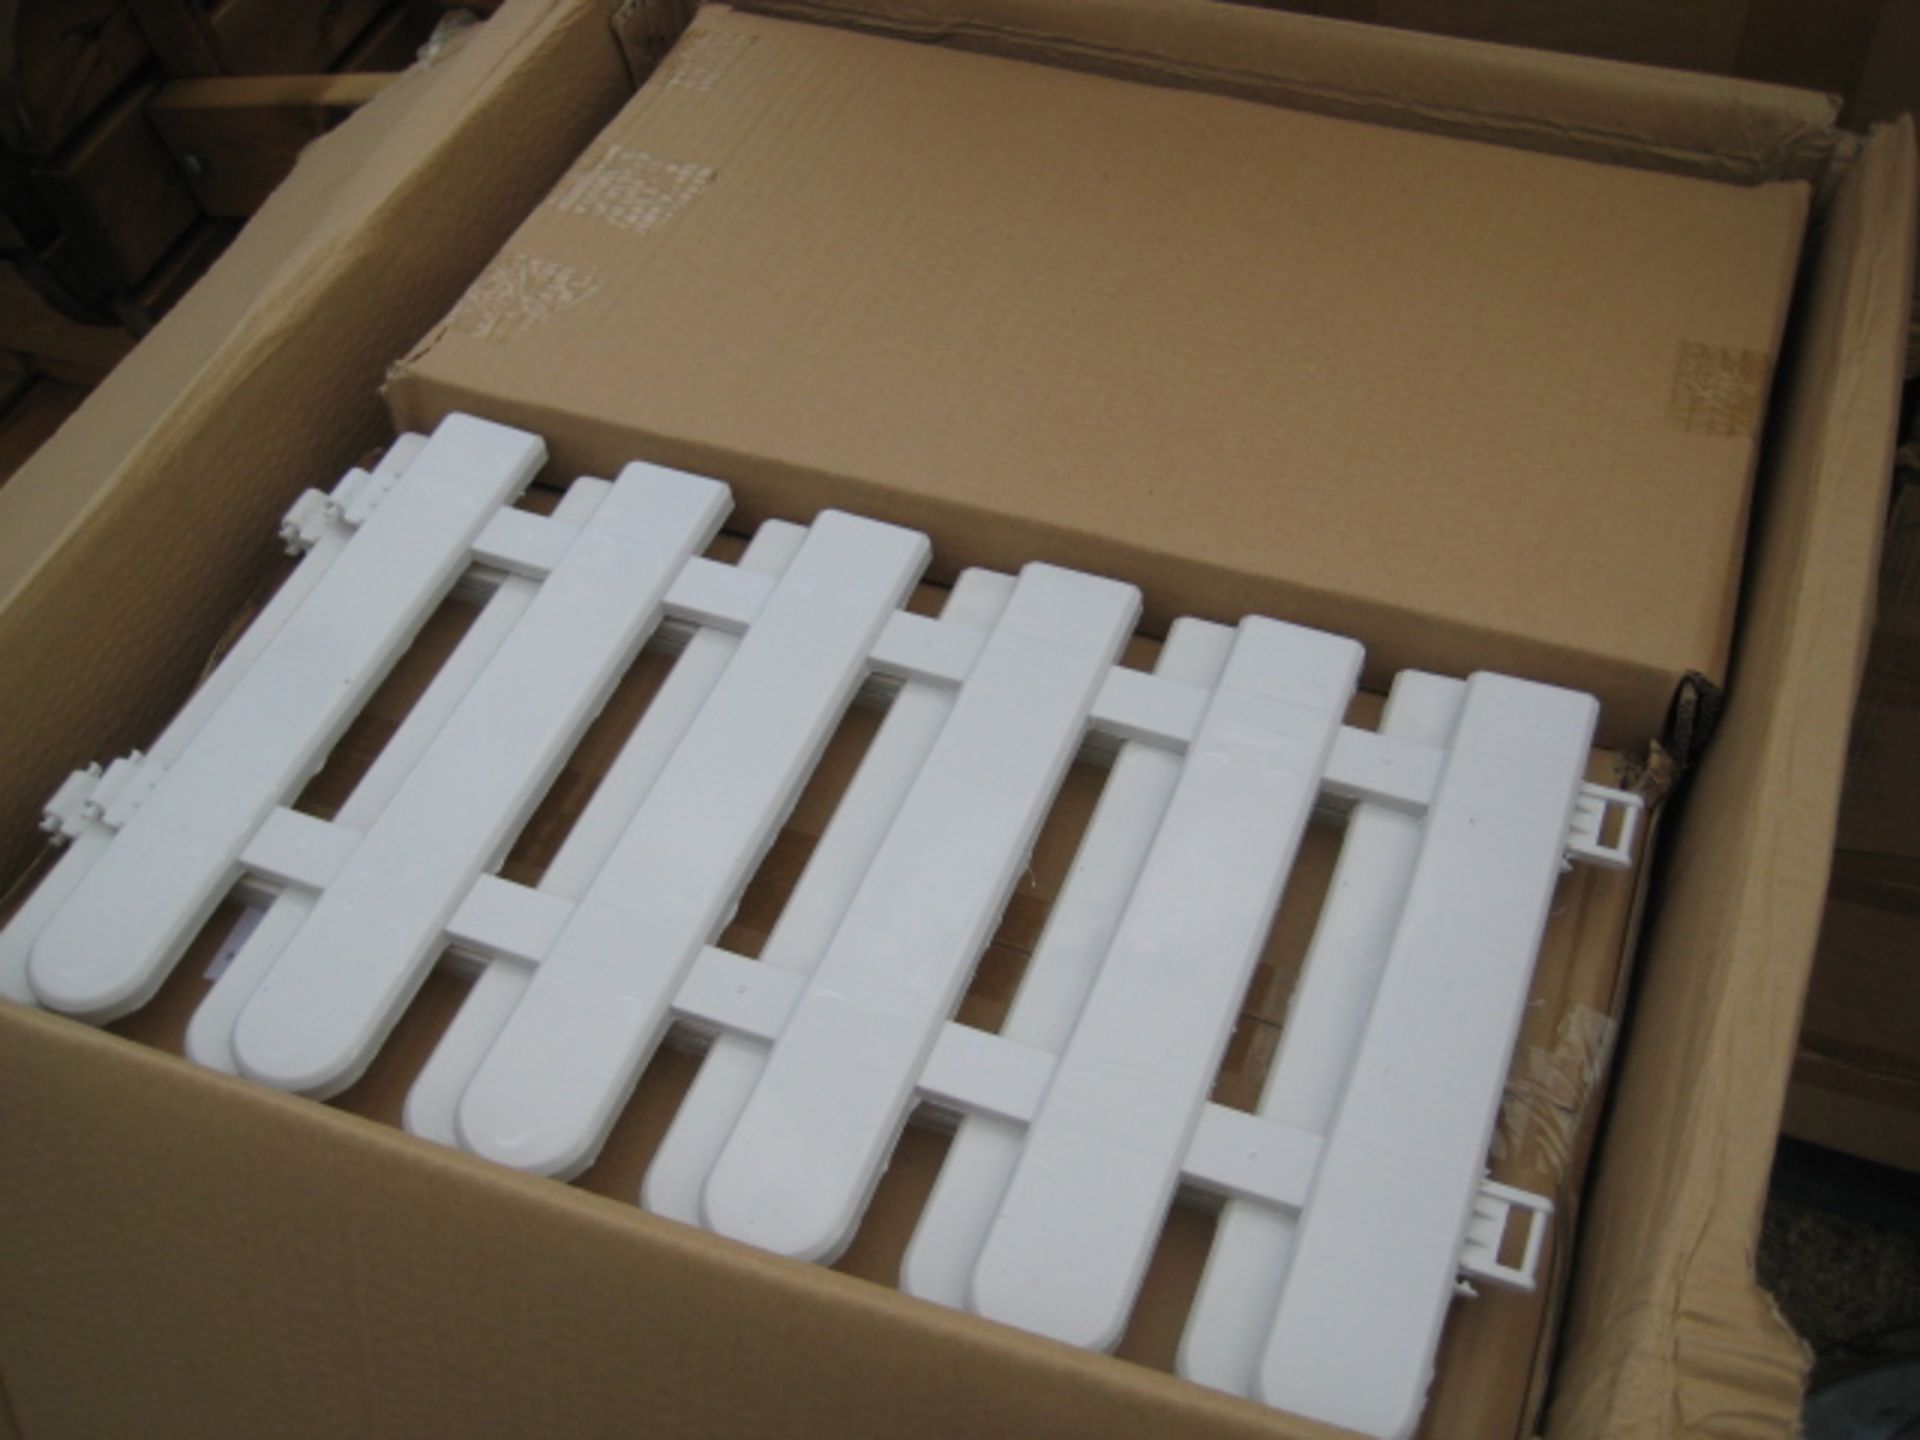 2 boxes containing 40 units in total of white interlocking picket fencing